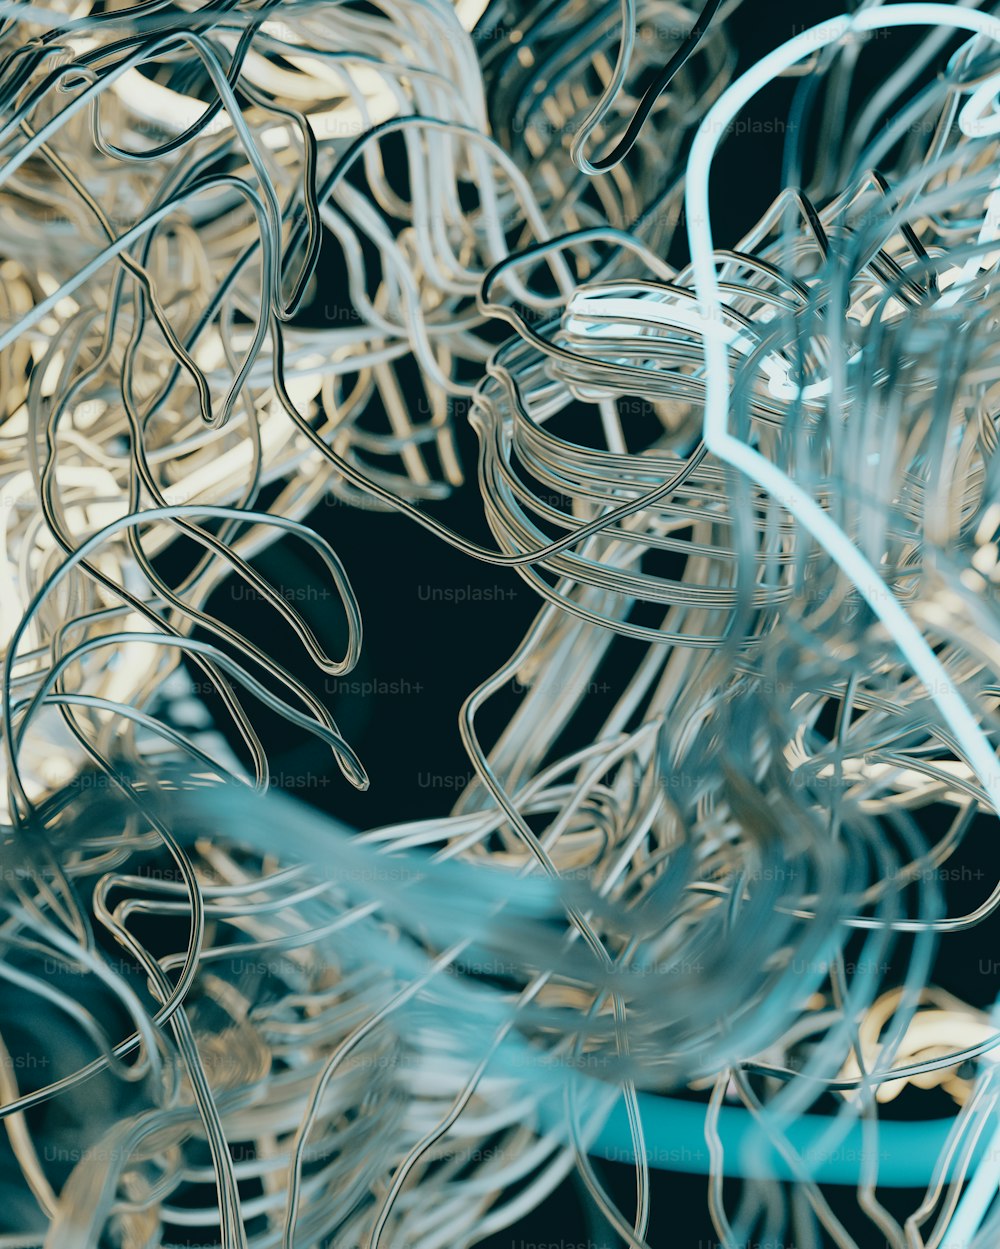 a close up of a bunch of wires